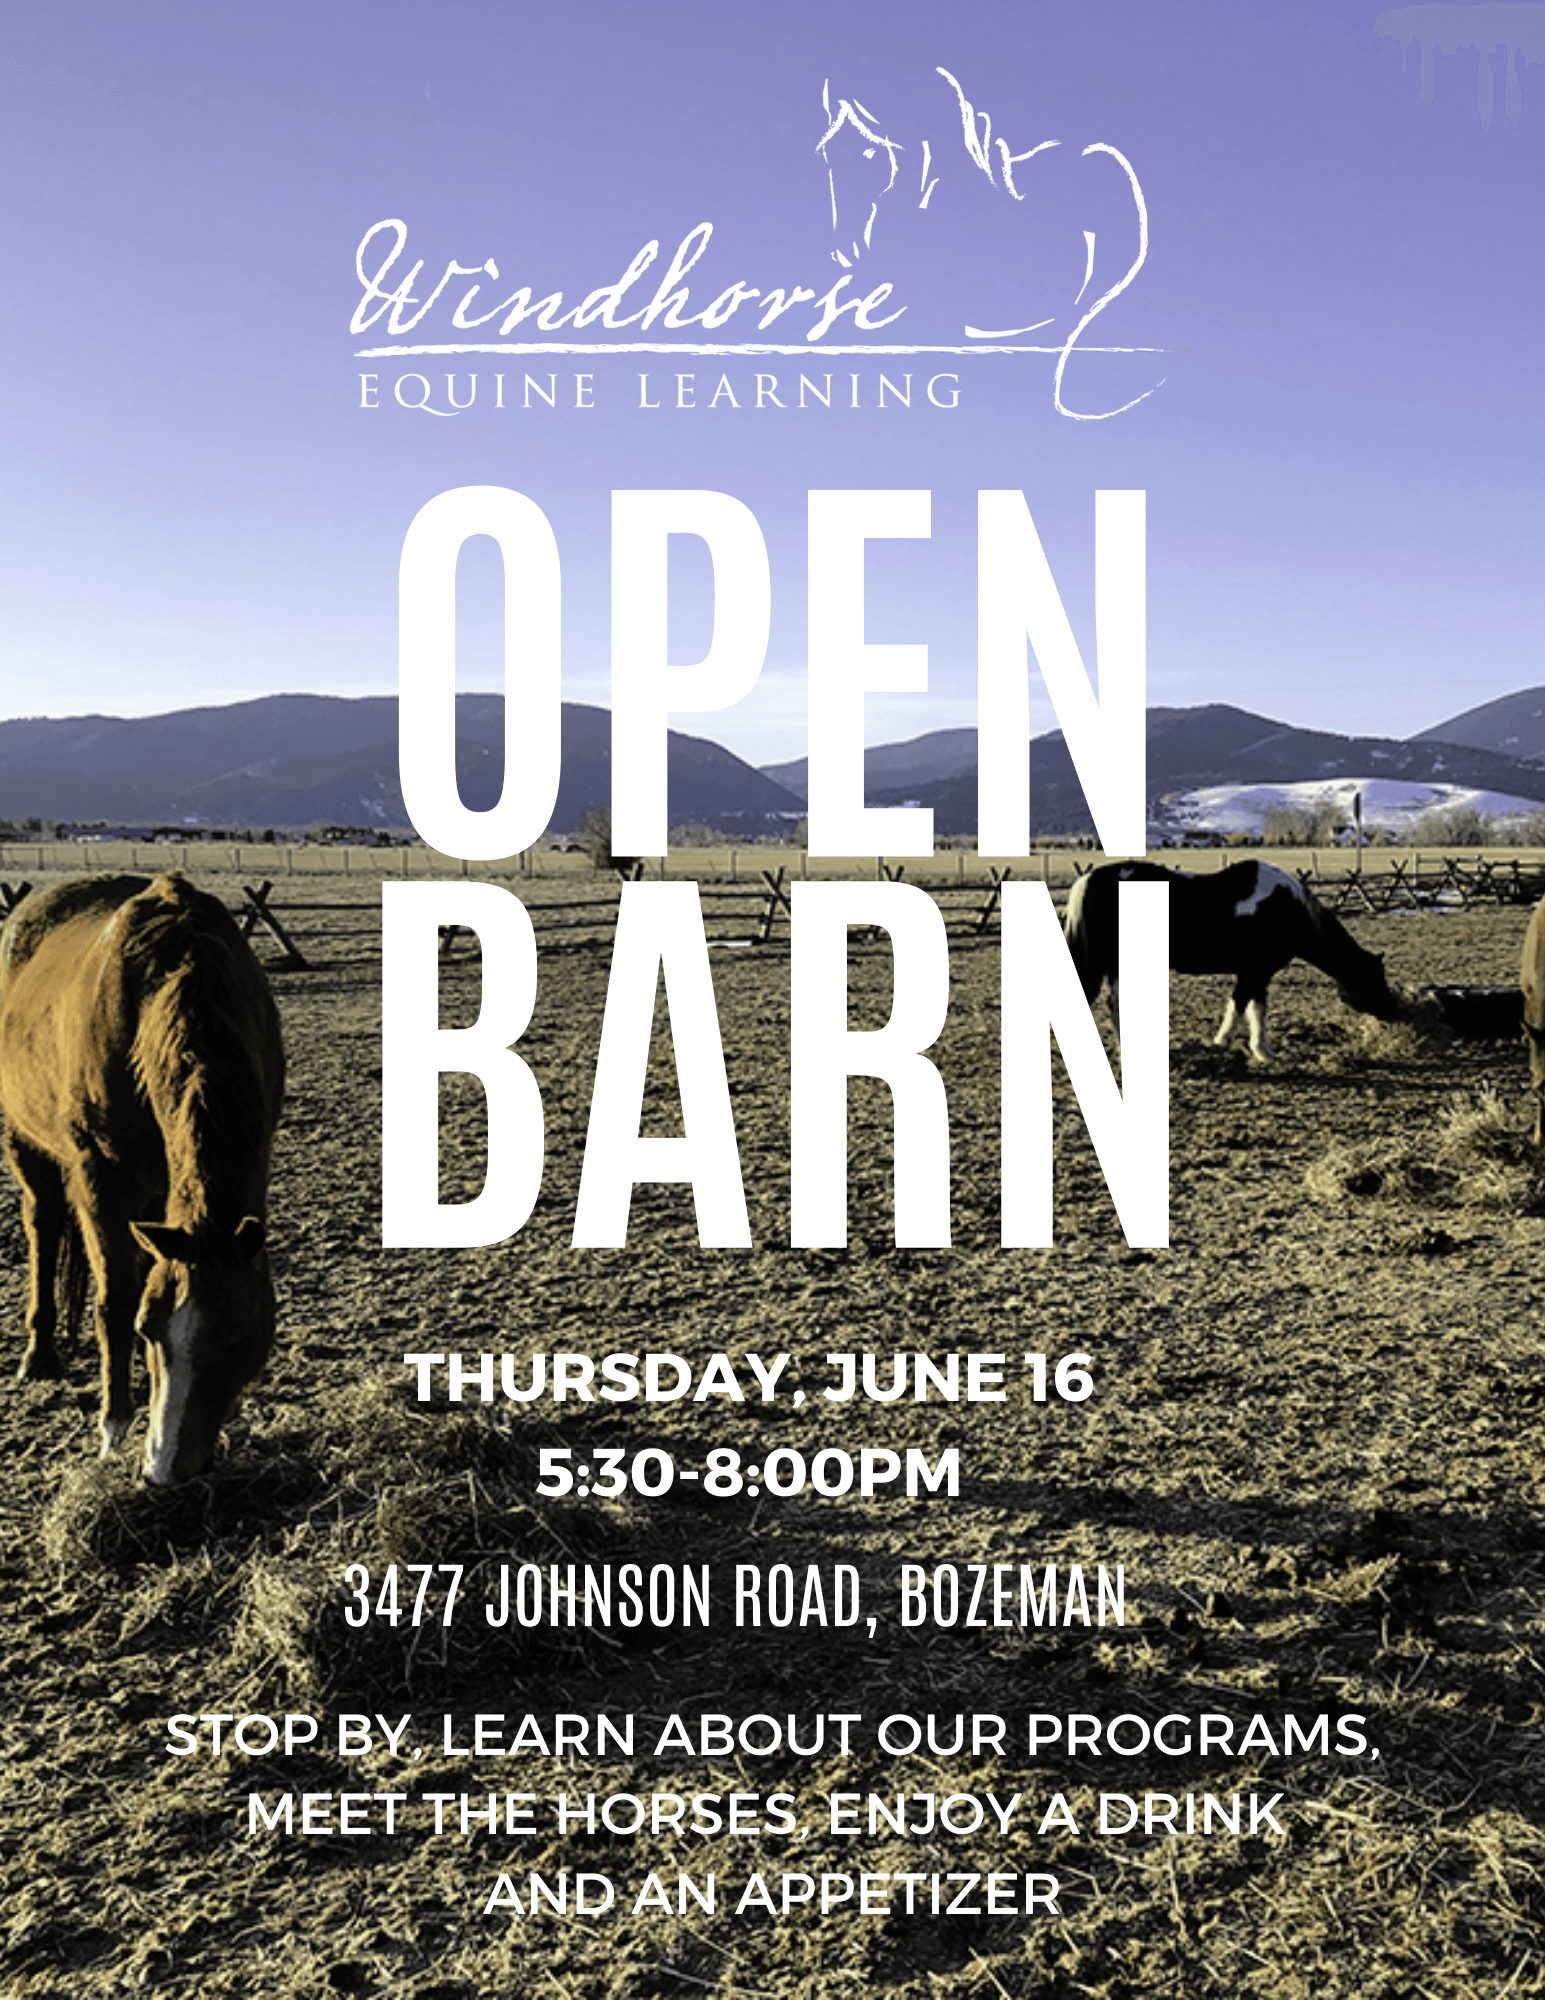 Visit Us During Our Open Barn Event, June 16